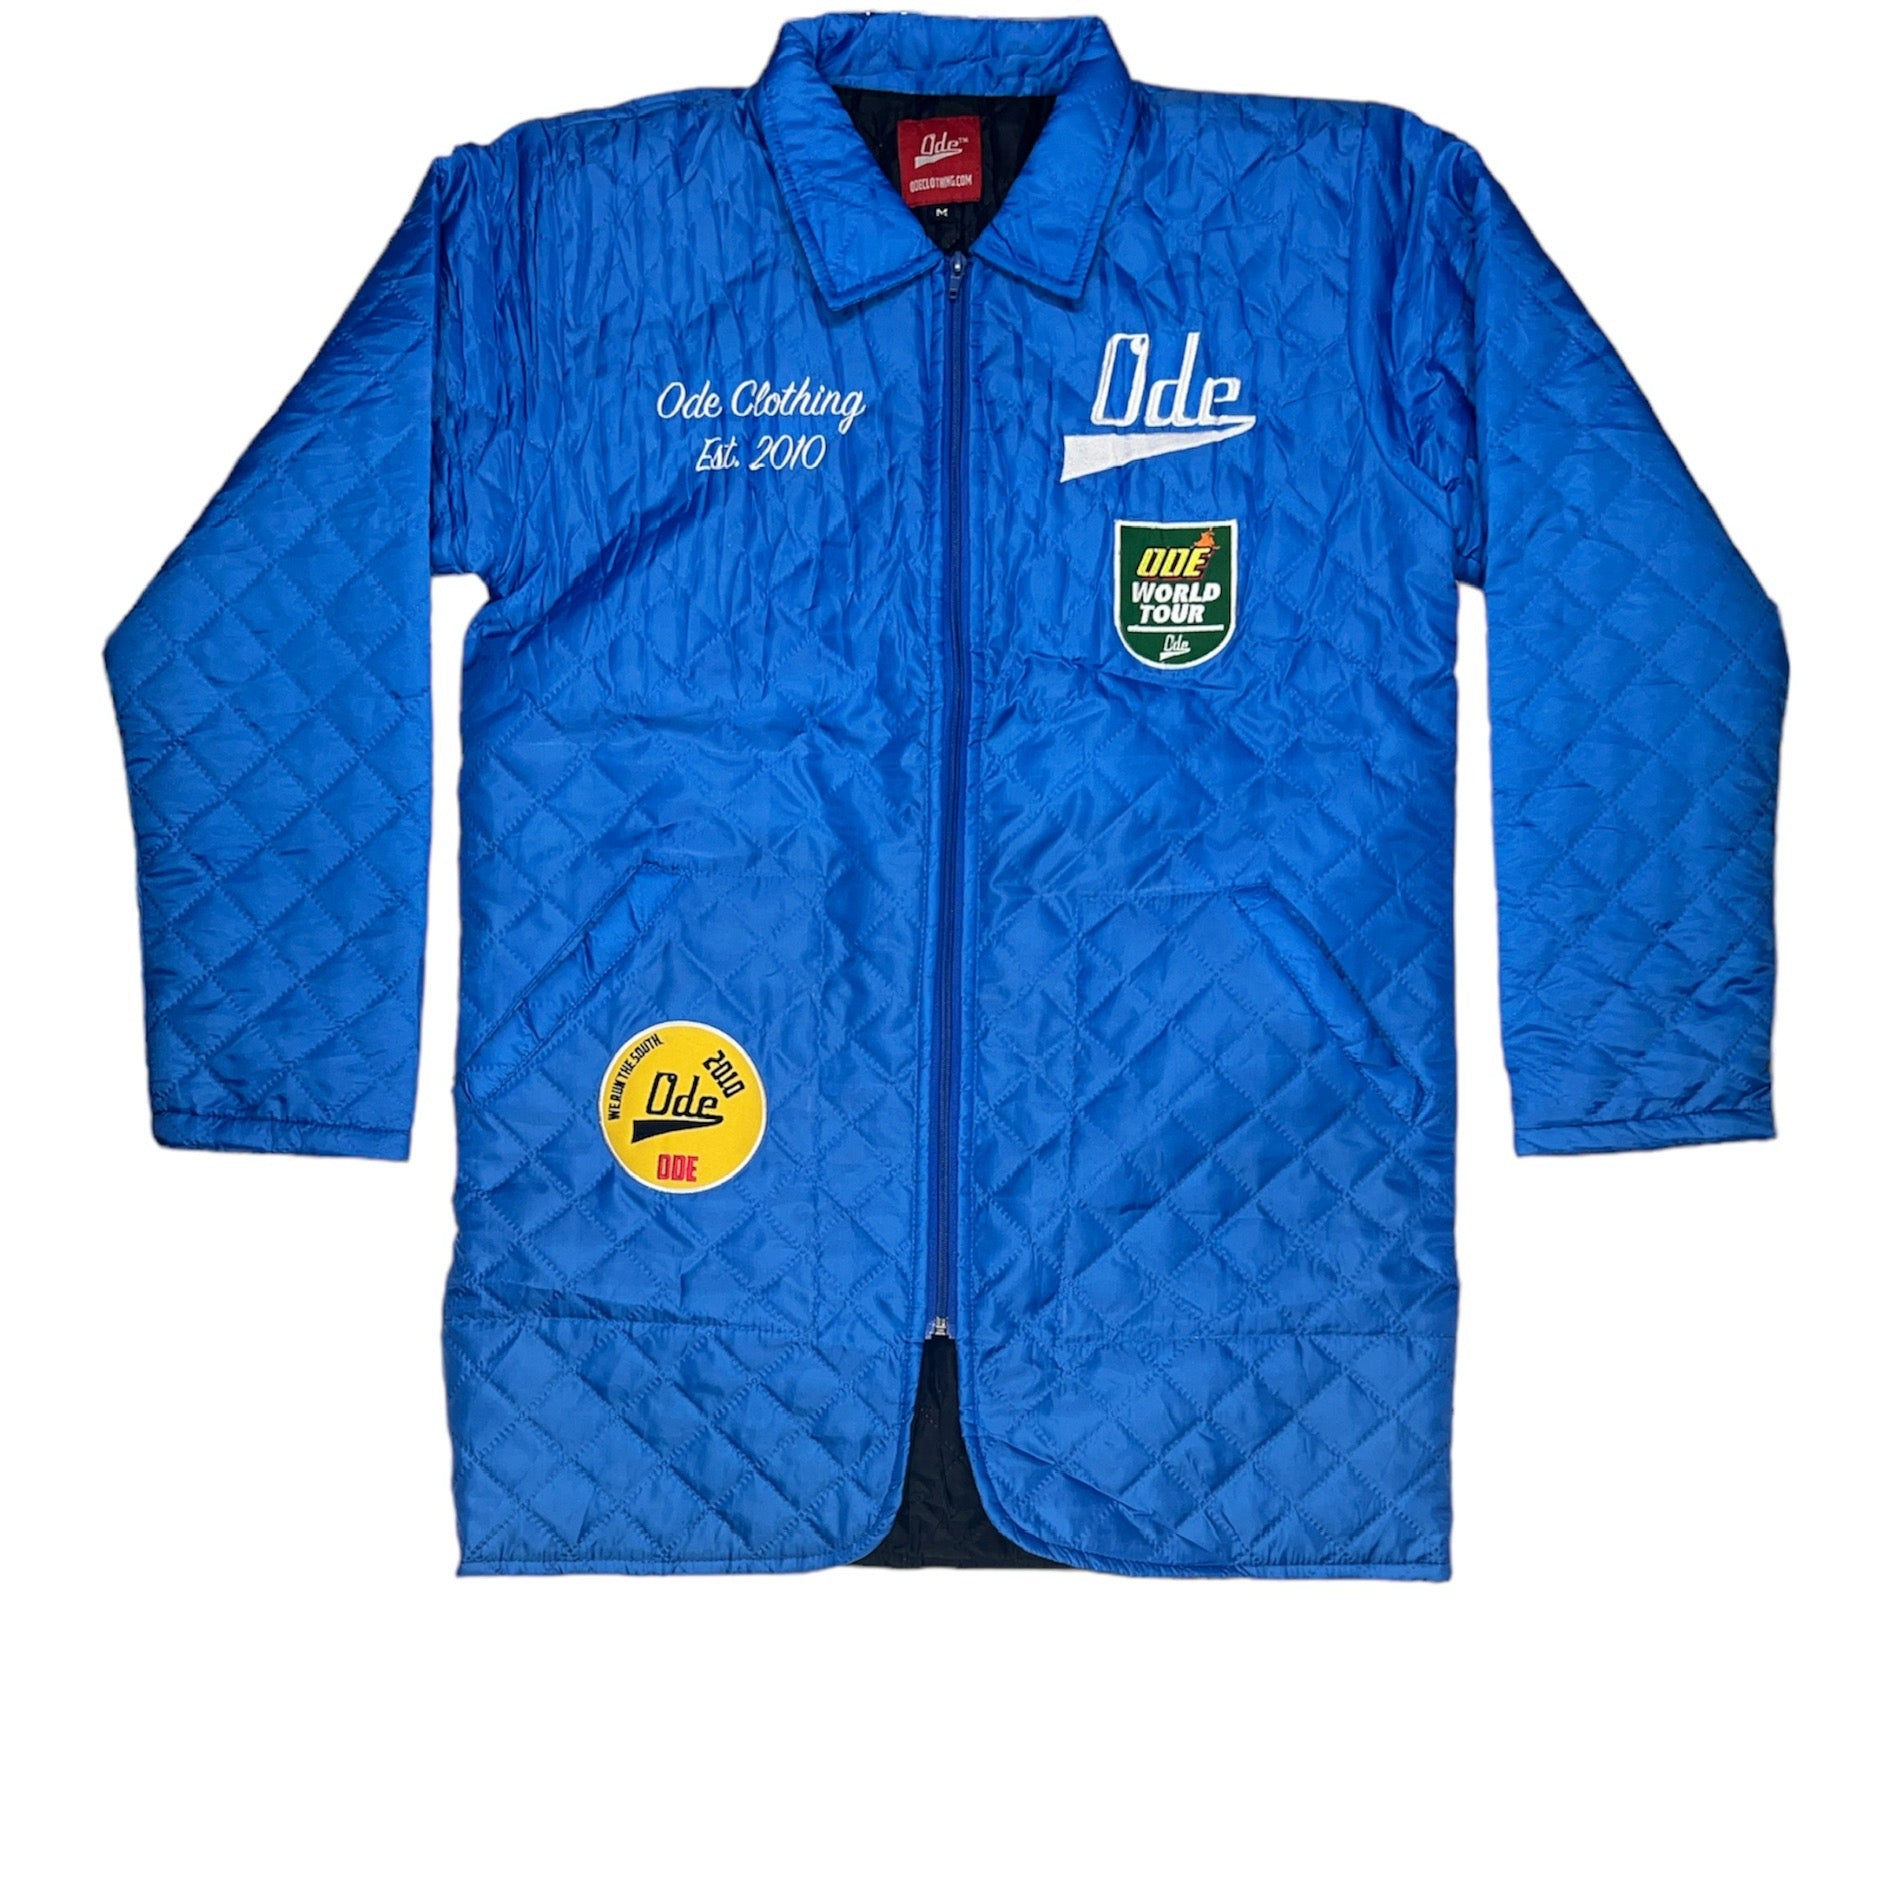 The Ode World Tour Blue Padded Jacket